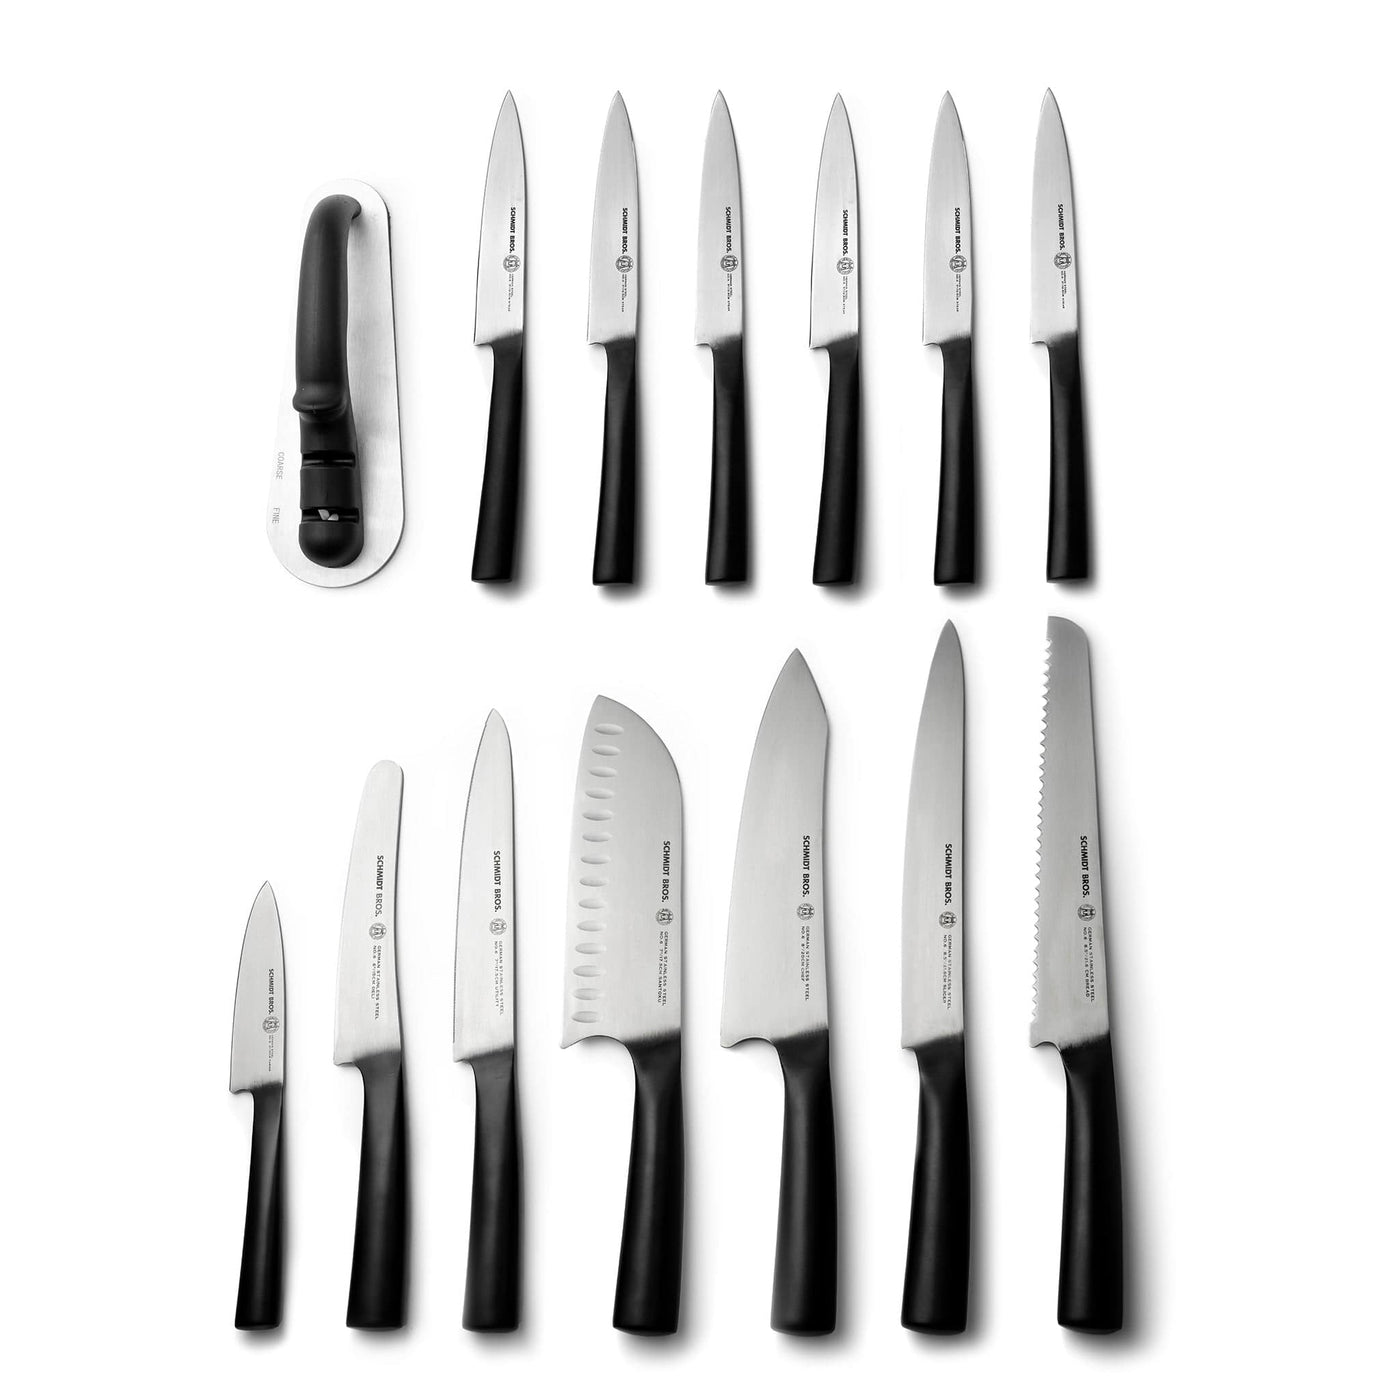 https://schmidtbrothers.com/cdn/shop/files/schmidt-brothers-kitchen-cutlery-schmidt-brothers-carbon-6-15-piece-knife-set-high-carbon-stainless-steel-cutlery-with-acacia-and-acrylic-magnetic-knife-block-and-knife-sharpener-3074_f21ea68b-a9a5-4afe-be3c-7d3be9d1d69a_1400x.jpg?v=1684155336